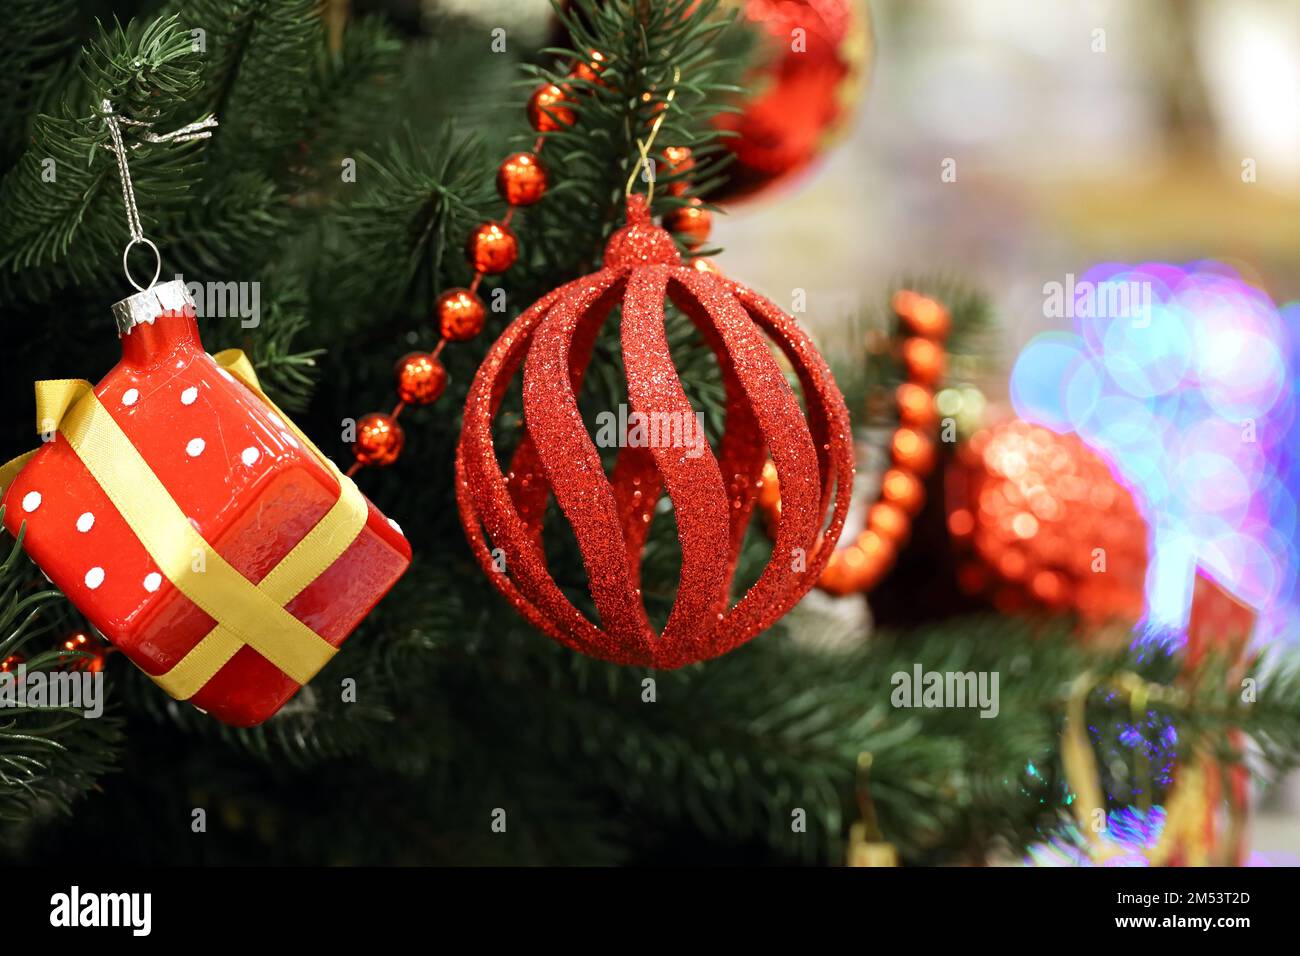 New Year toys on Christmas tree. Red ball and gift box hanging on blurred festive lights background Stock Photo